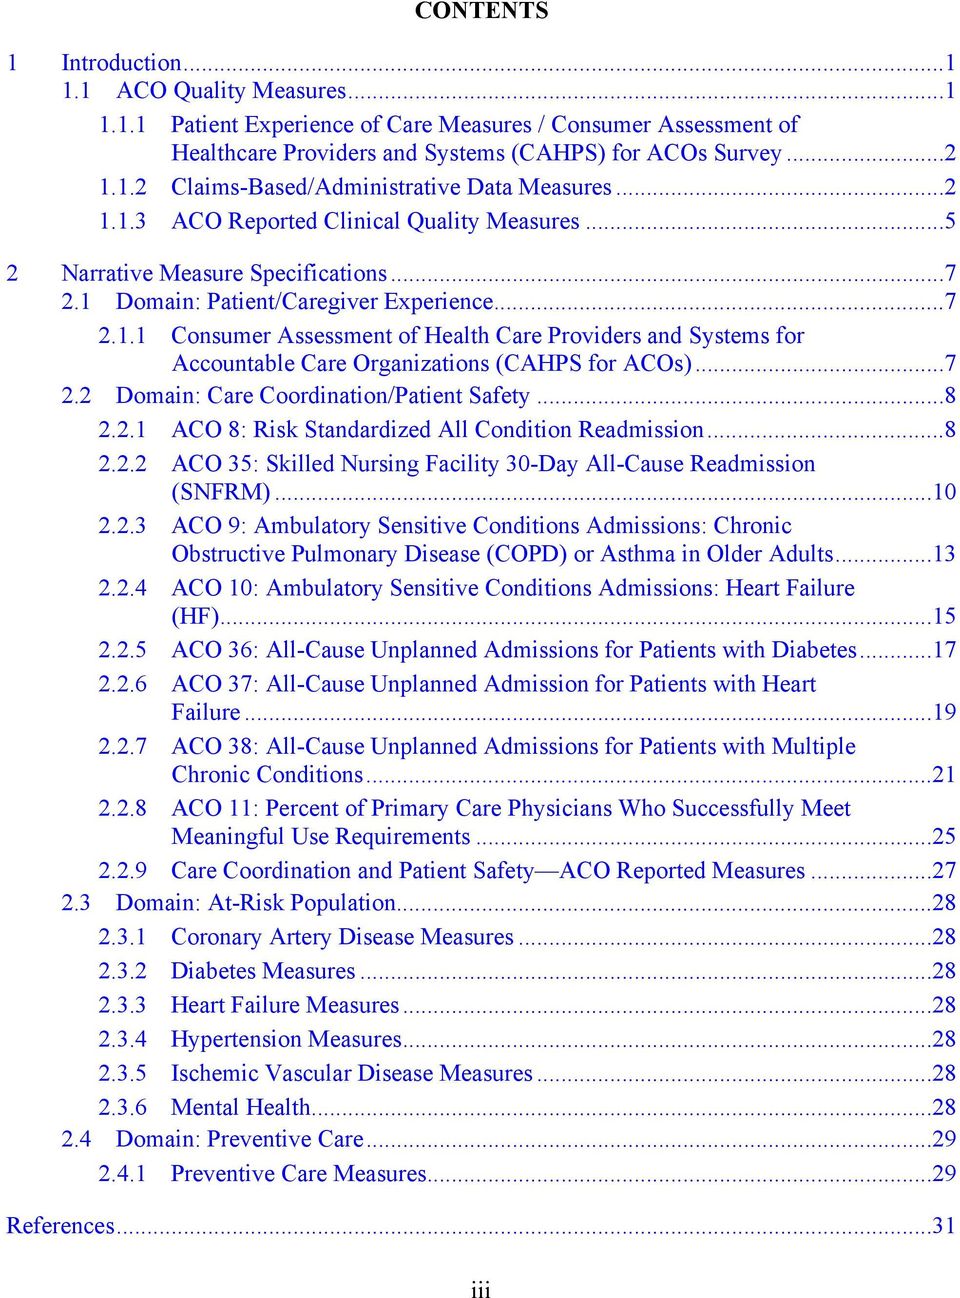 ..7 2.2 Domain: Care Coordination/Patient Safety...8 2.2.1 ACO 8: Risk Standardized All Condition Readmission...8 2.2.2 ACO 35: Skilled Nursing Facility 30-Day All-Cause Readmission (SNFRM)...10 2.2.3 ACO 9: Ambulatory Sensitive Conditions Admissions: Chronic Obstructive Pulmonary Disease (COPD) or Asthma in Older Adults.